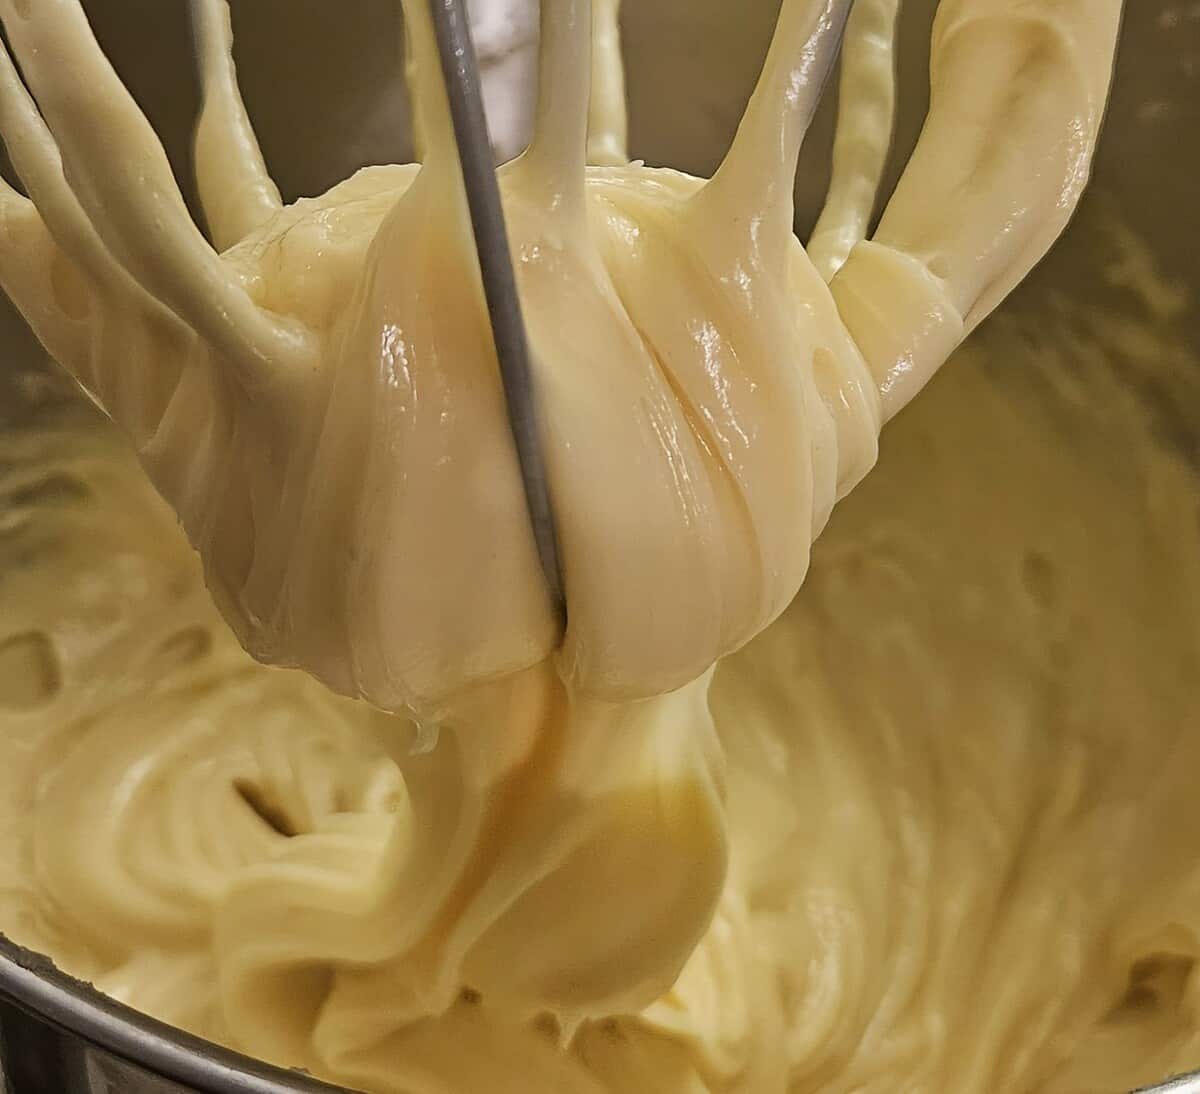 mixer whip attachment with finished pate choux batter flowing from it into the bowl, showing the smooth consistency.